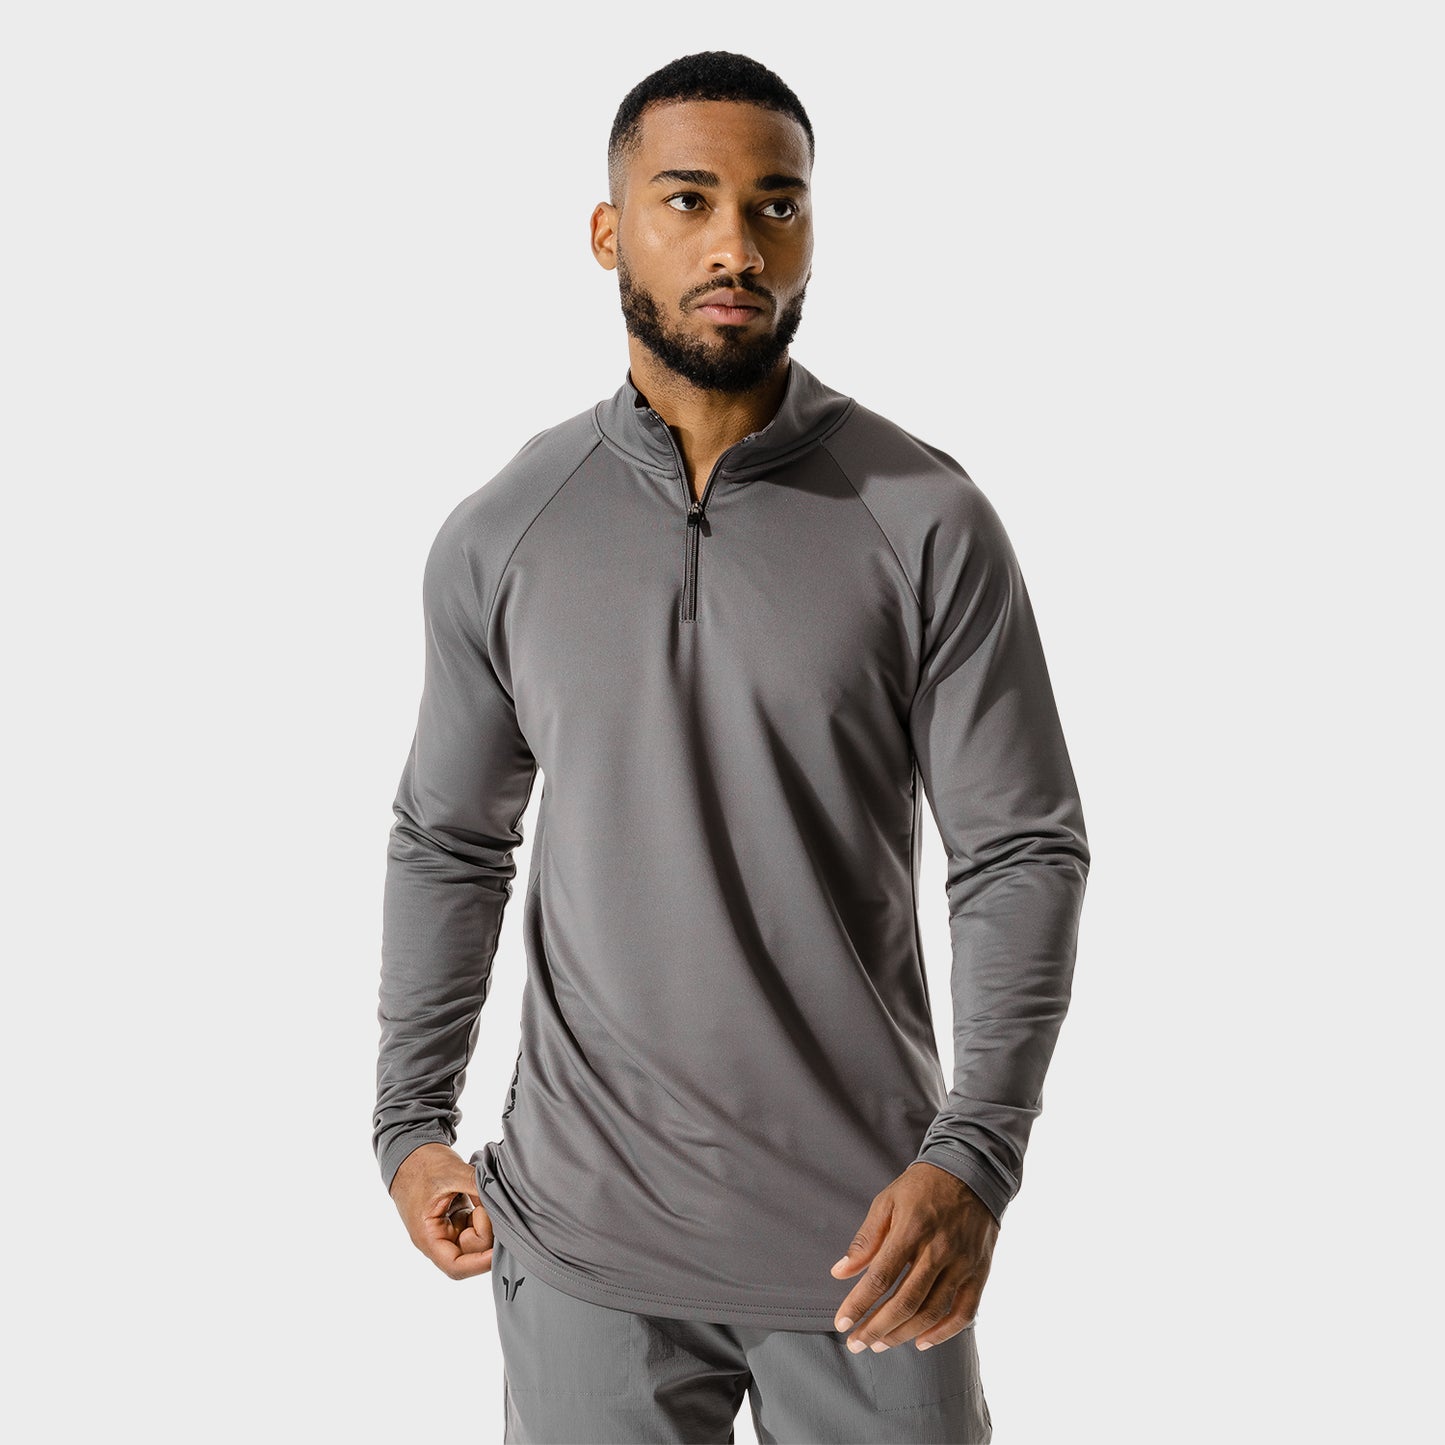 squatwolf-running-tops-code-run-the-city-top-charcoal-gym-clothes-for-men